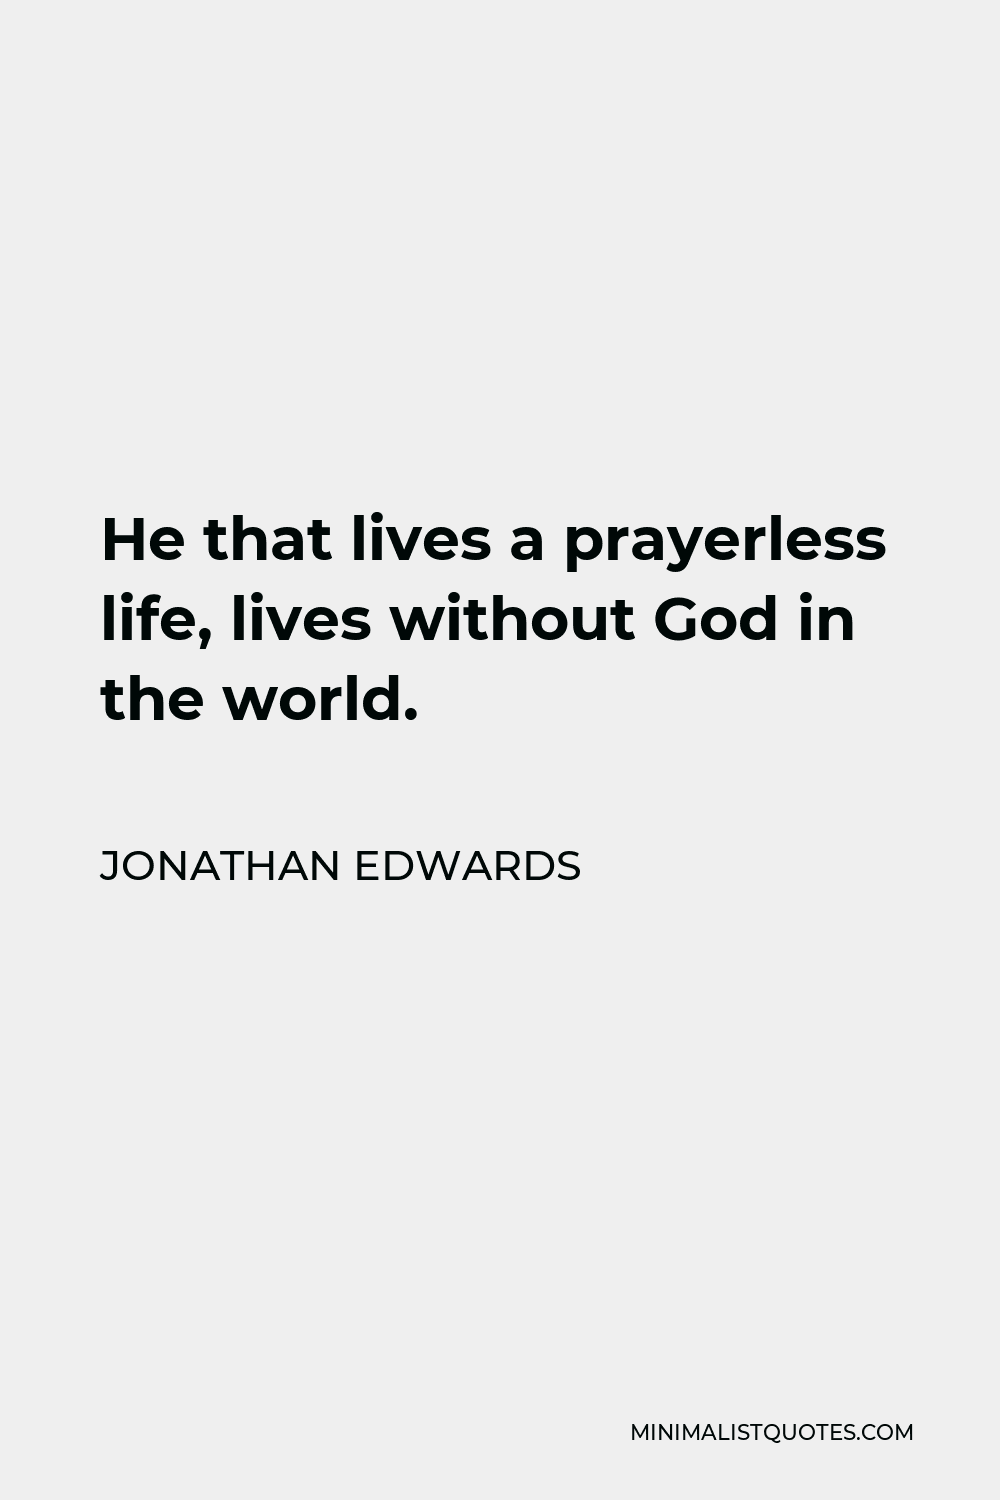 Jonathan Edwards Quote - He that lives a prayerless life, lives without God in the world.